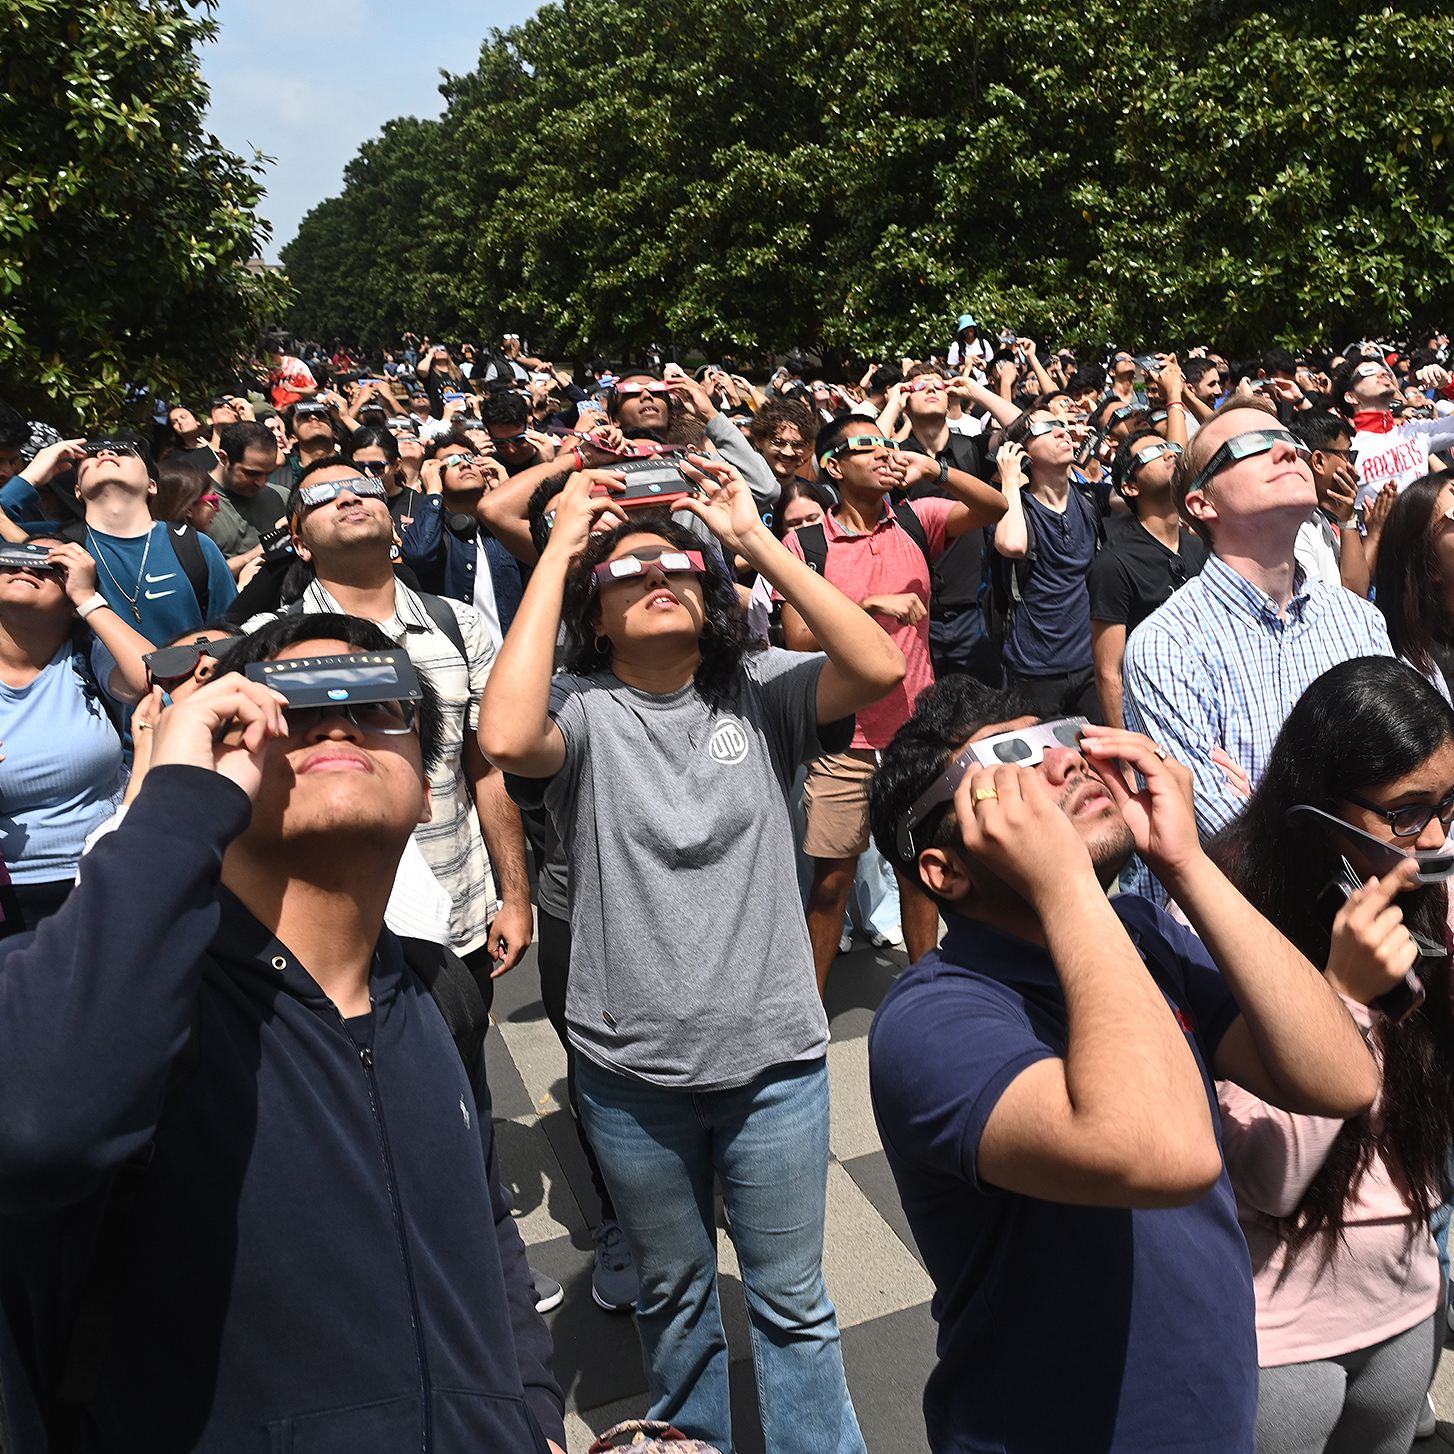 Photo Gallery: Eclipse Brings Campus Community Outside for a Glimpse. Group of people wearing eclipse glasses while looking up at the sun.